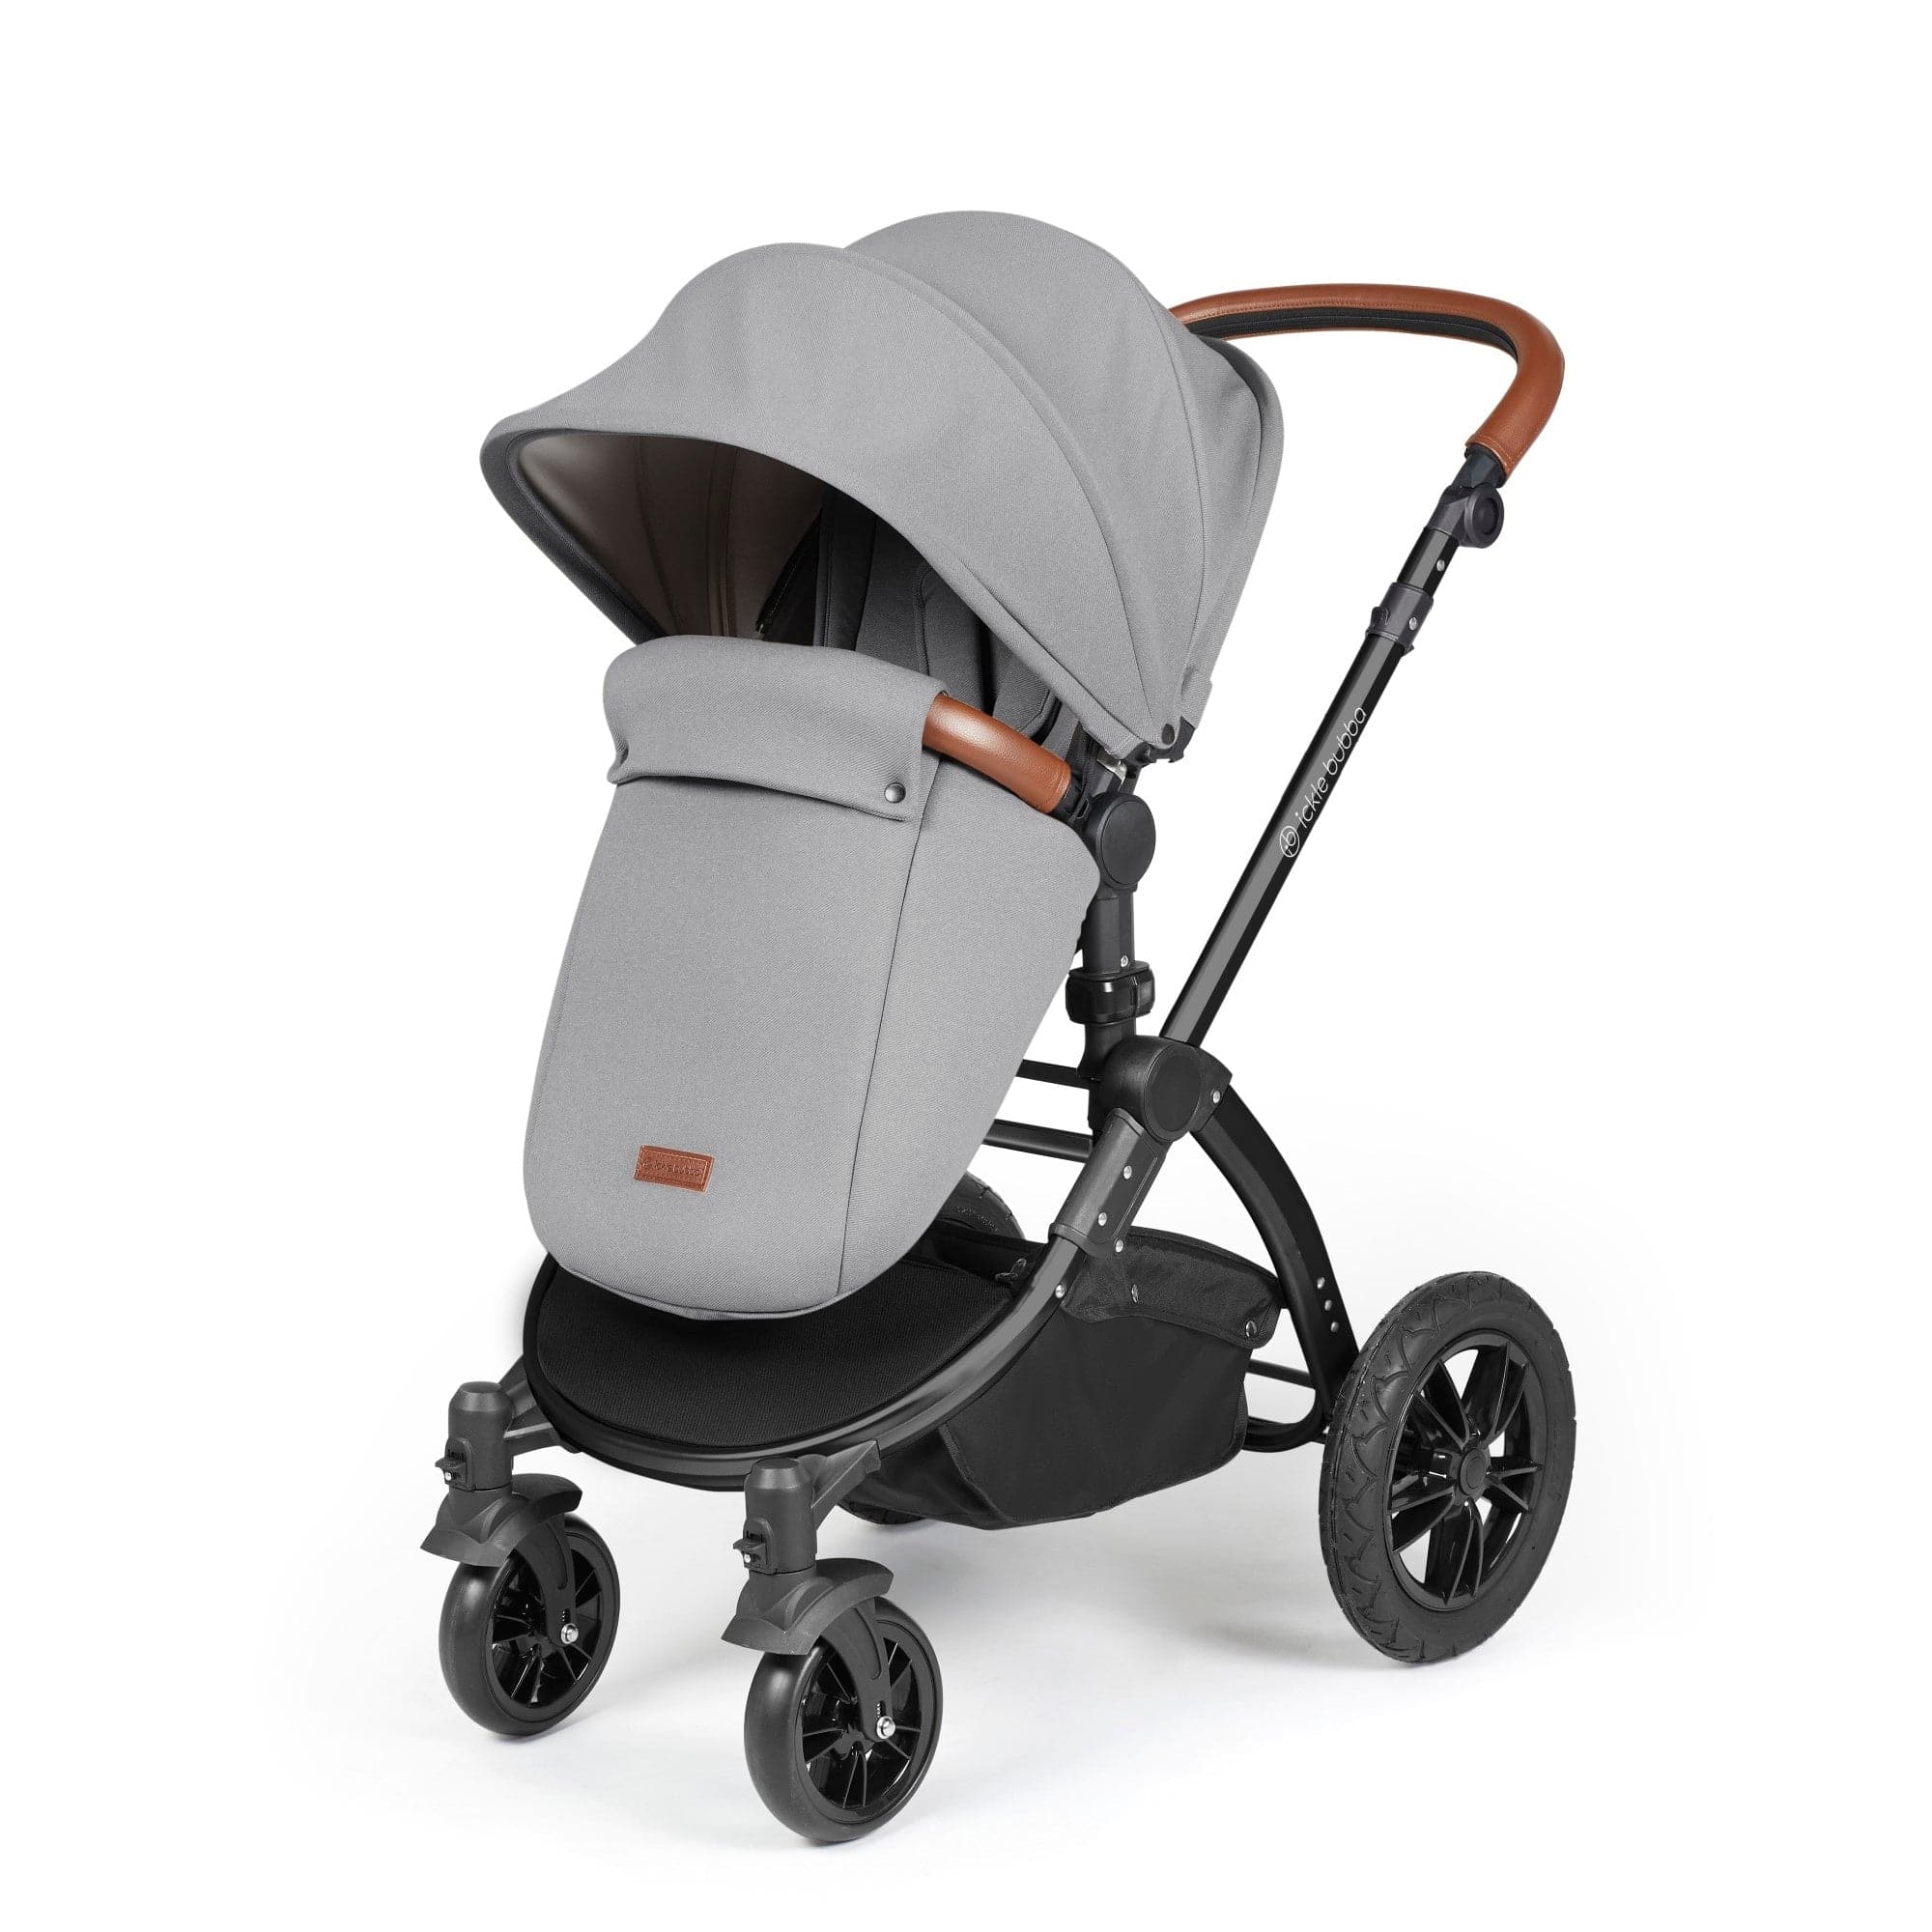 Ickle Bubba Stomp Luxe All-in-One I-Size Travel System With Isofix Base - Black / Pearl Grey / Tan - For Your Little One